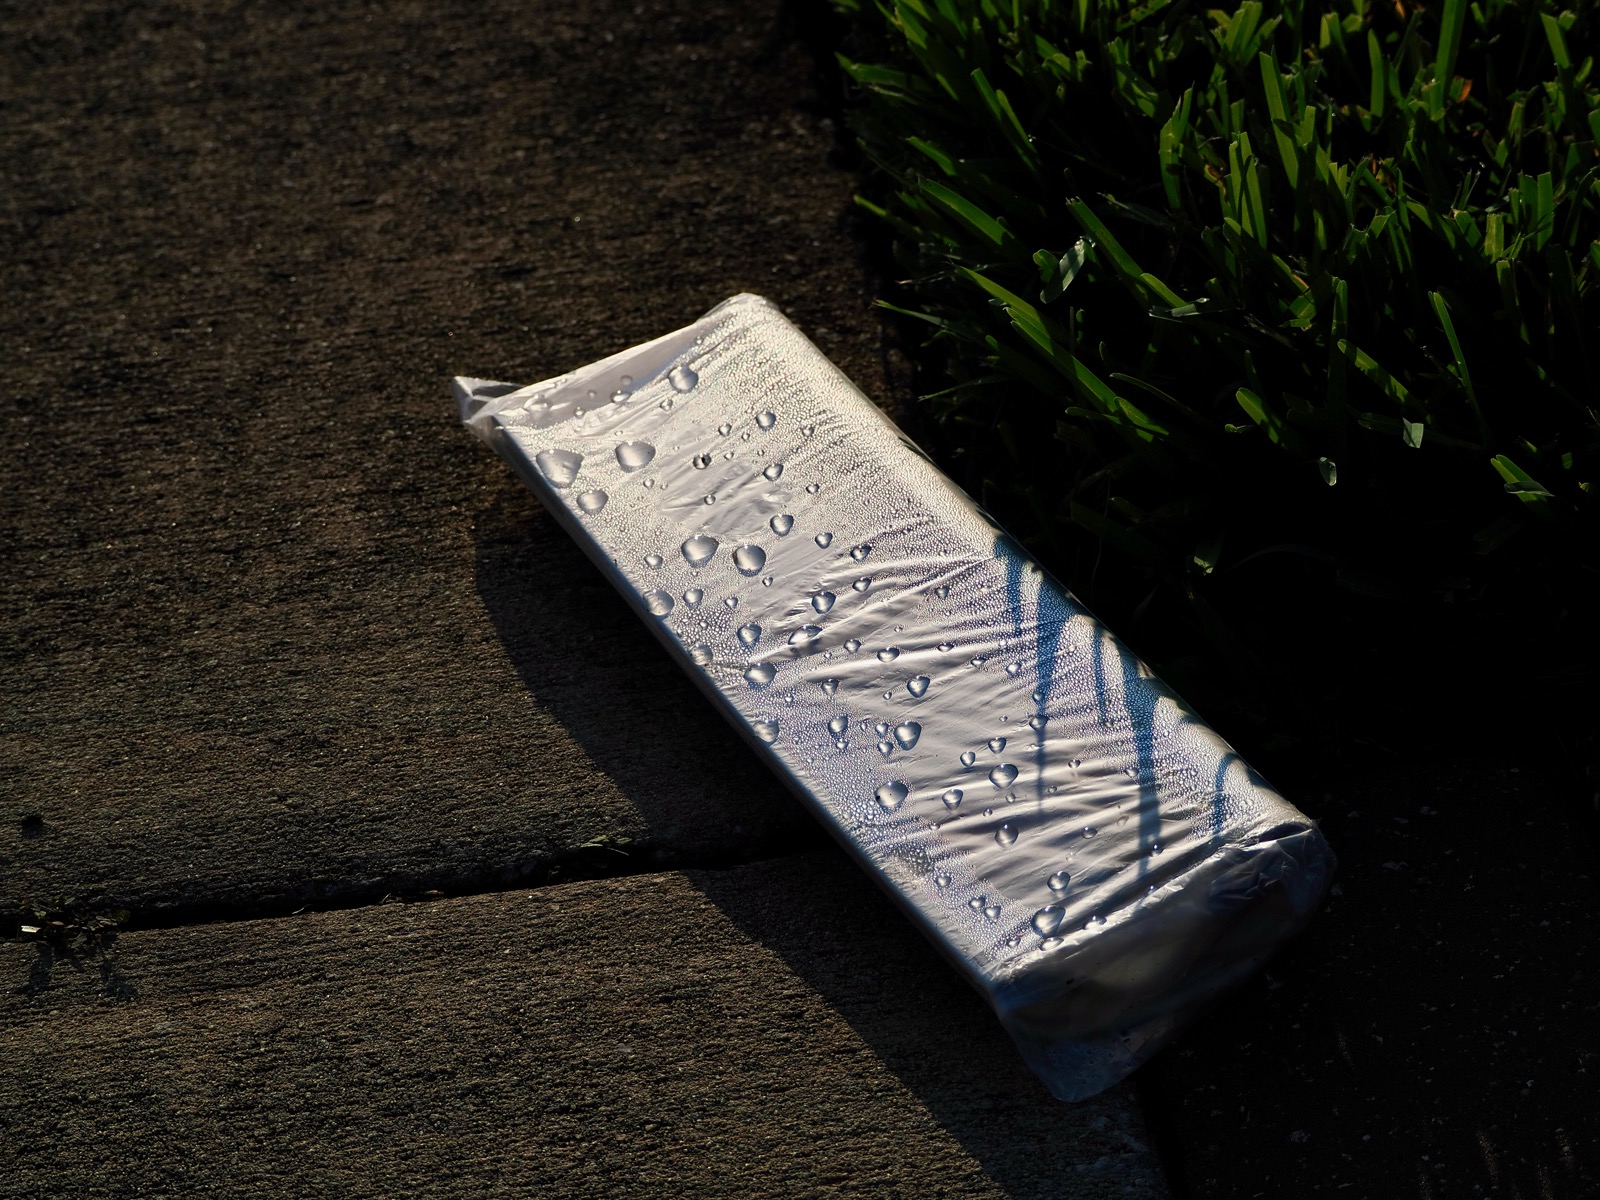 Image of water droplets on the plastic bag enclosing a folded paper lying on the sidewalk next to some grass